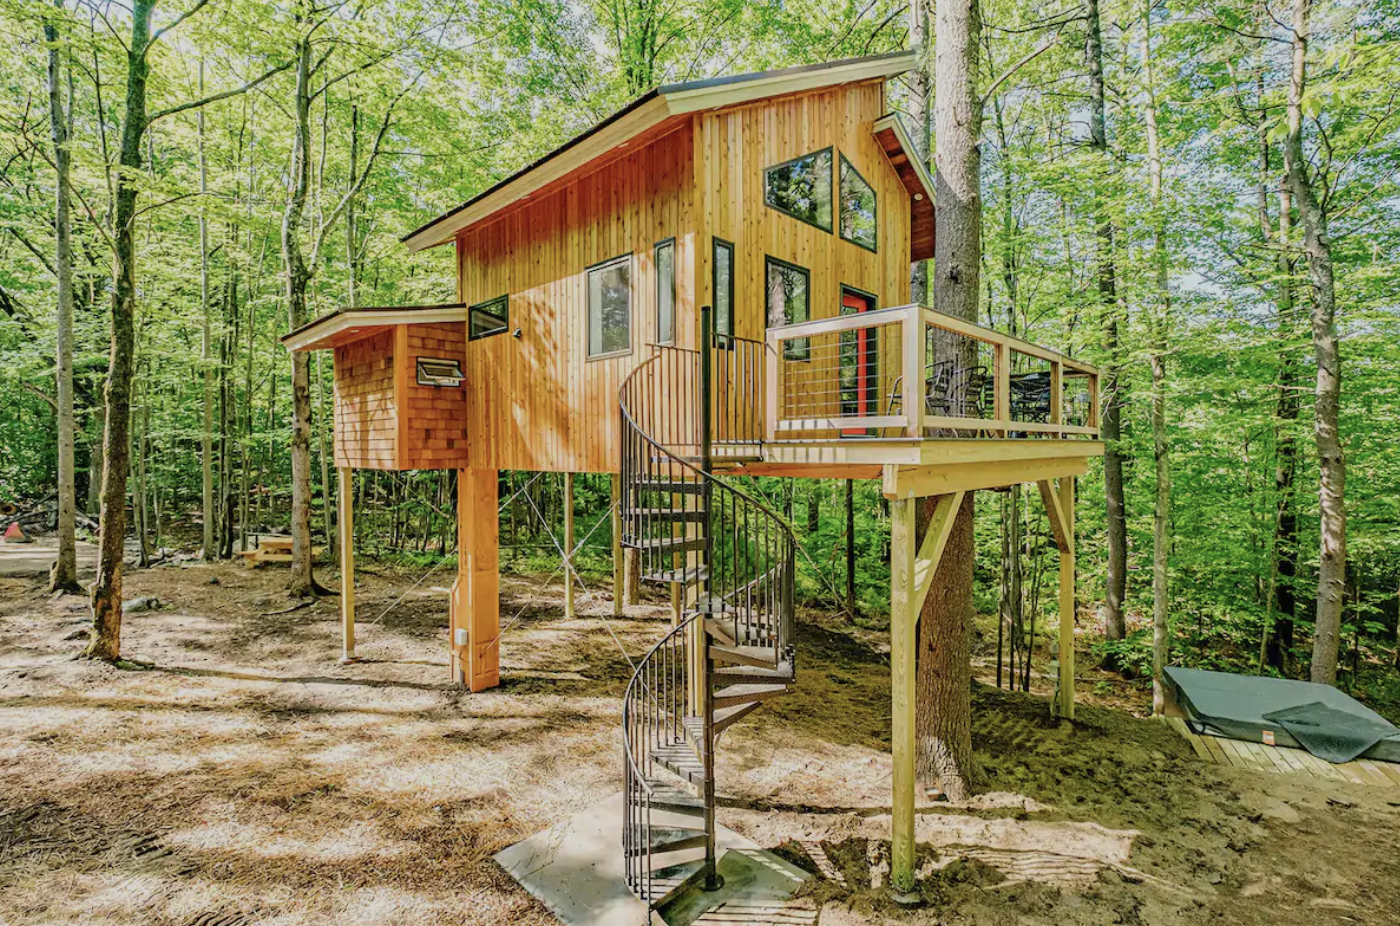 Men Soaked Radioaktiv 33 Amazing Treehouses You Can Rent in 2023 - Best Tree House Vacations